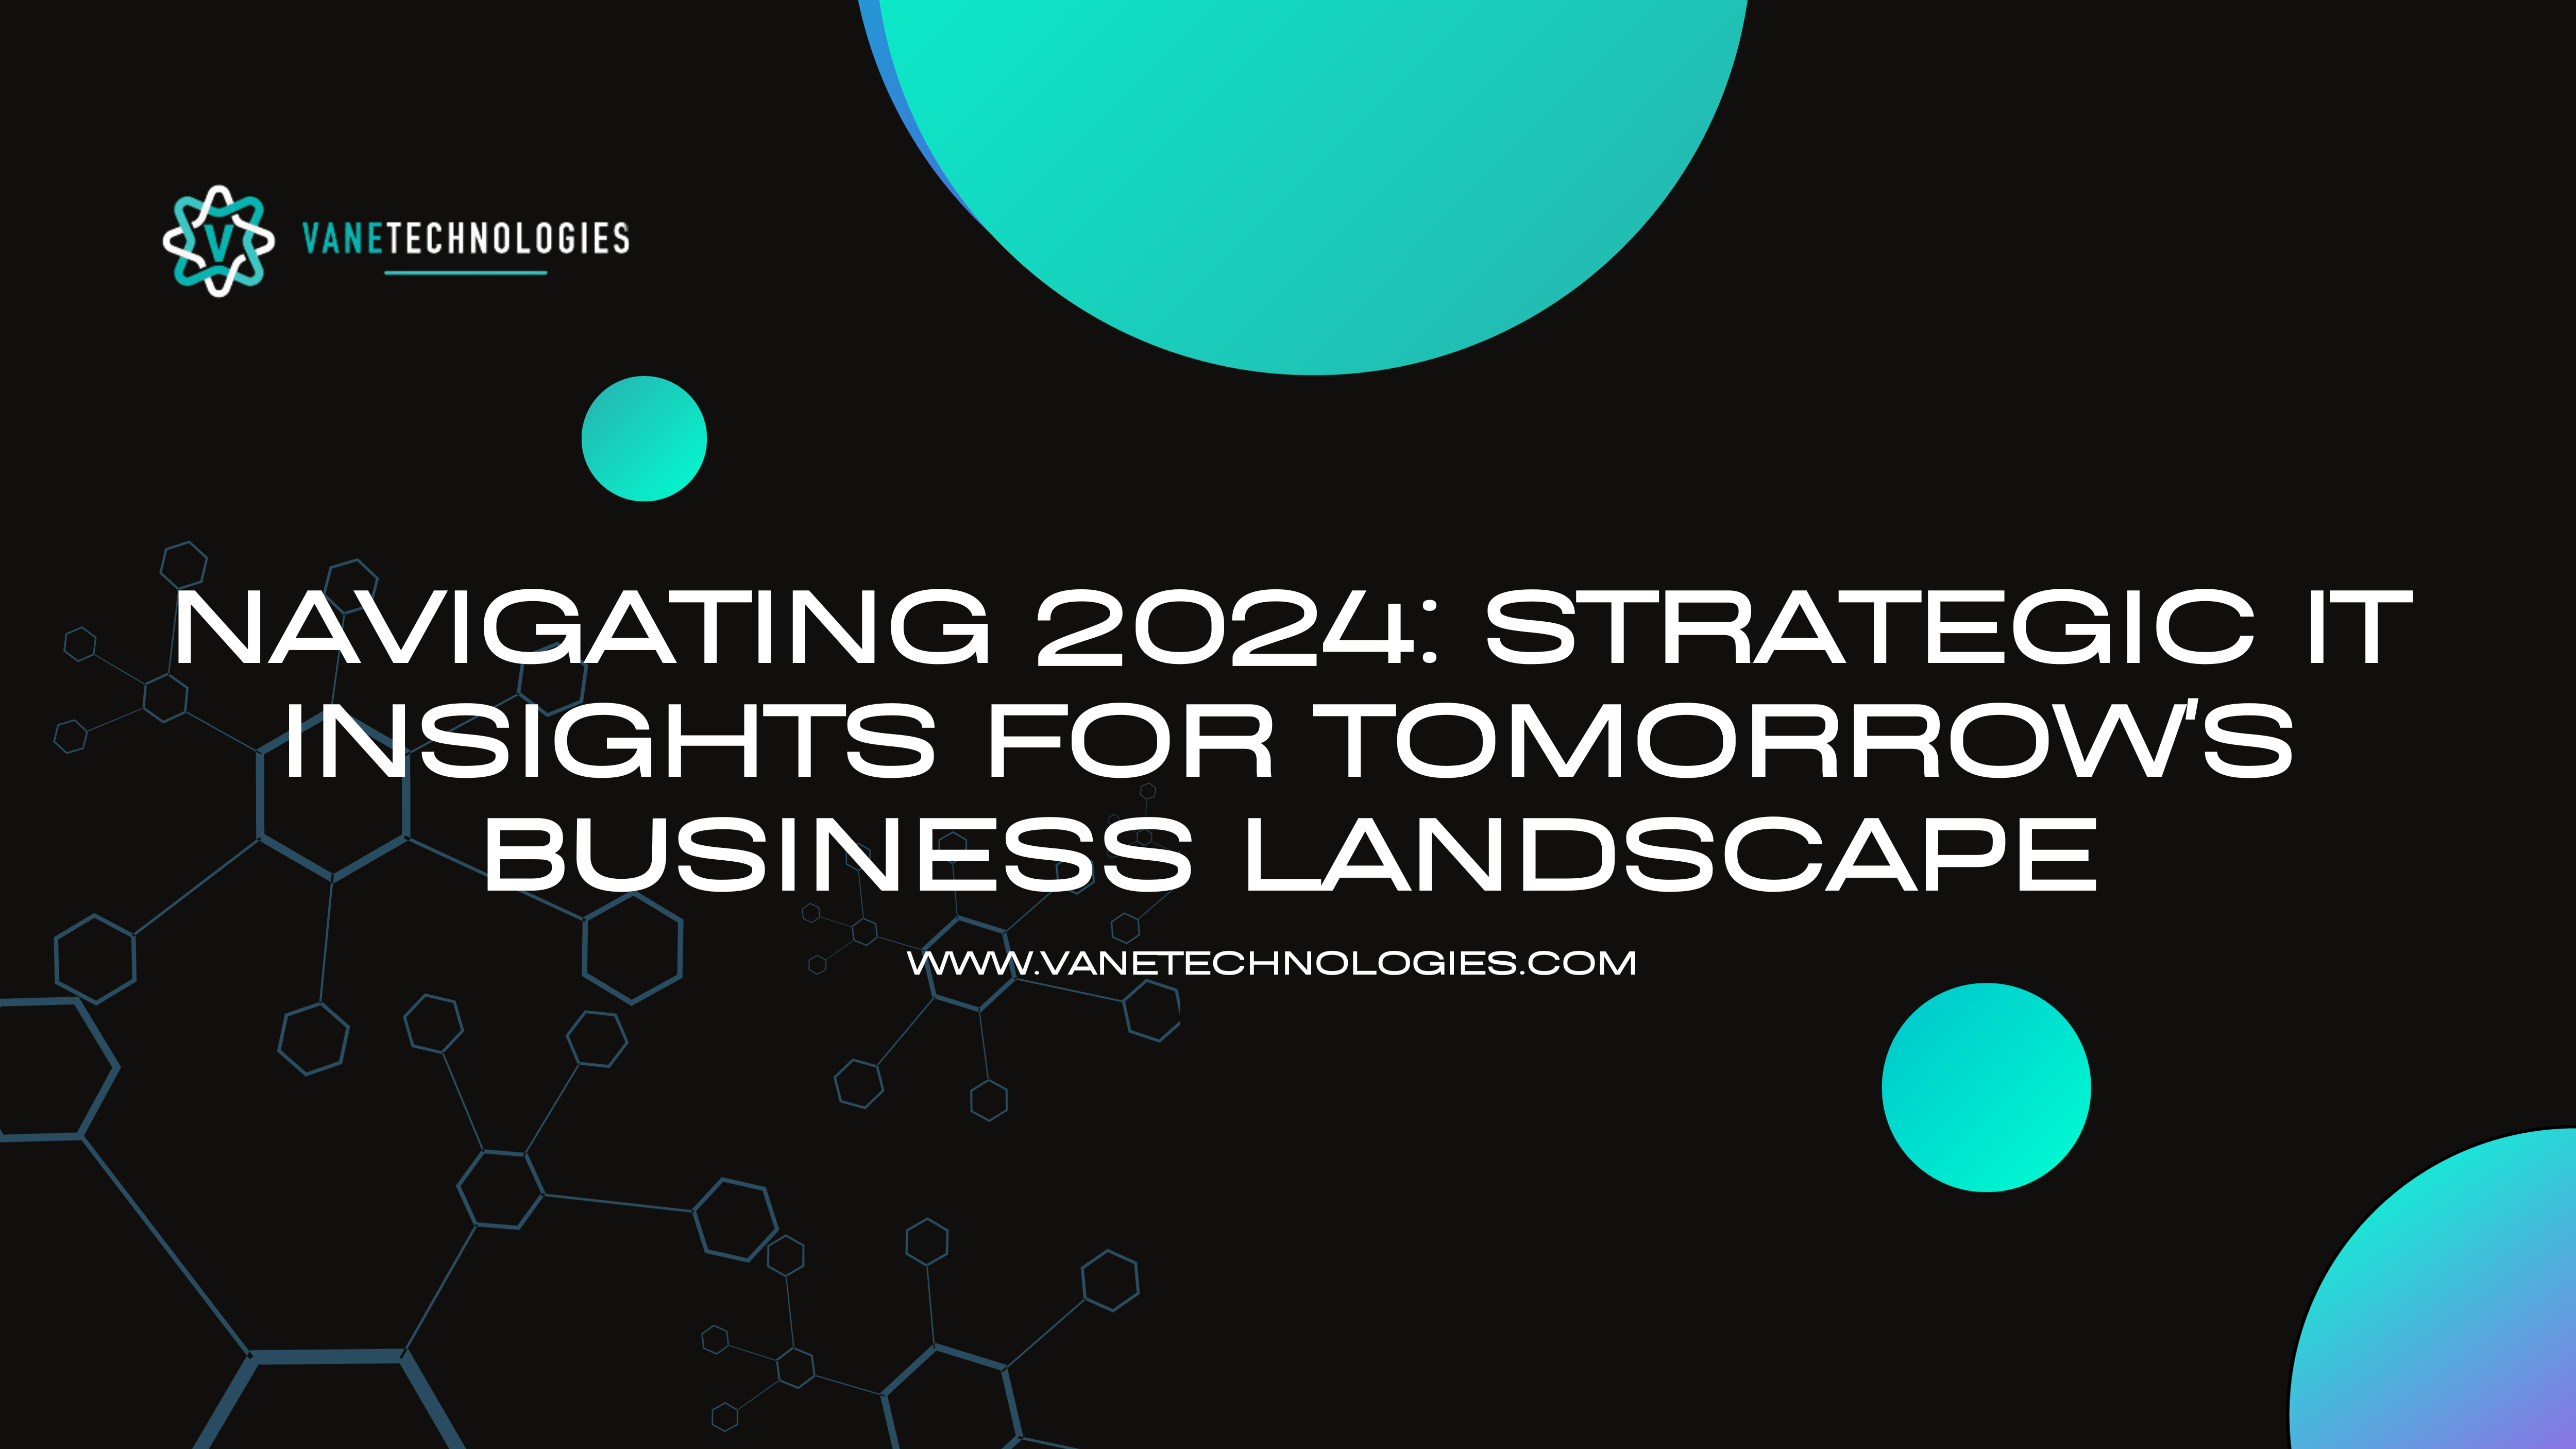 Navigating 2024: Strategic IT Insights for Tomorrow's Business Landscape